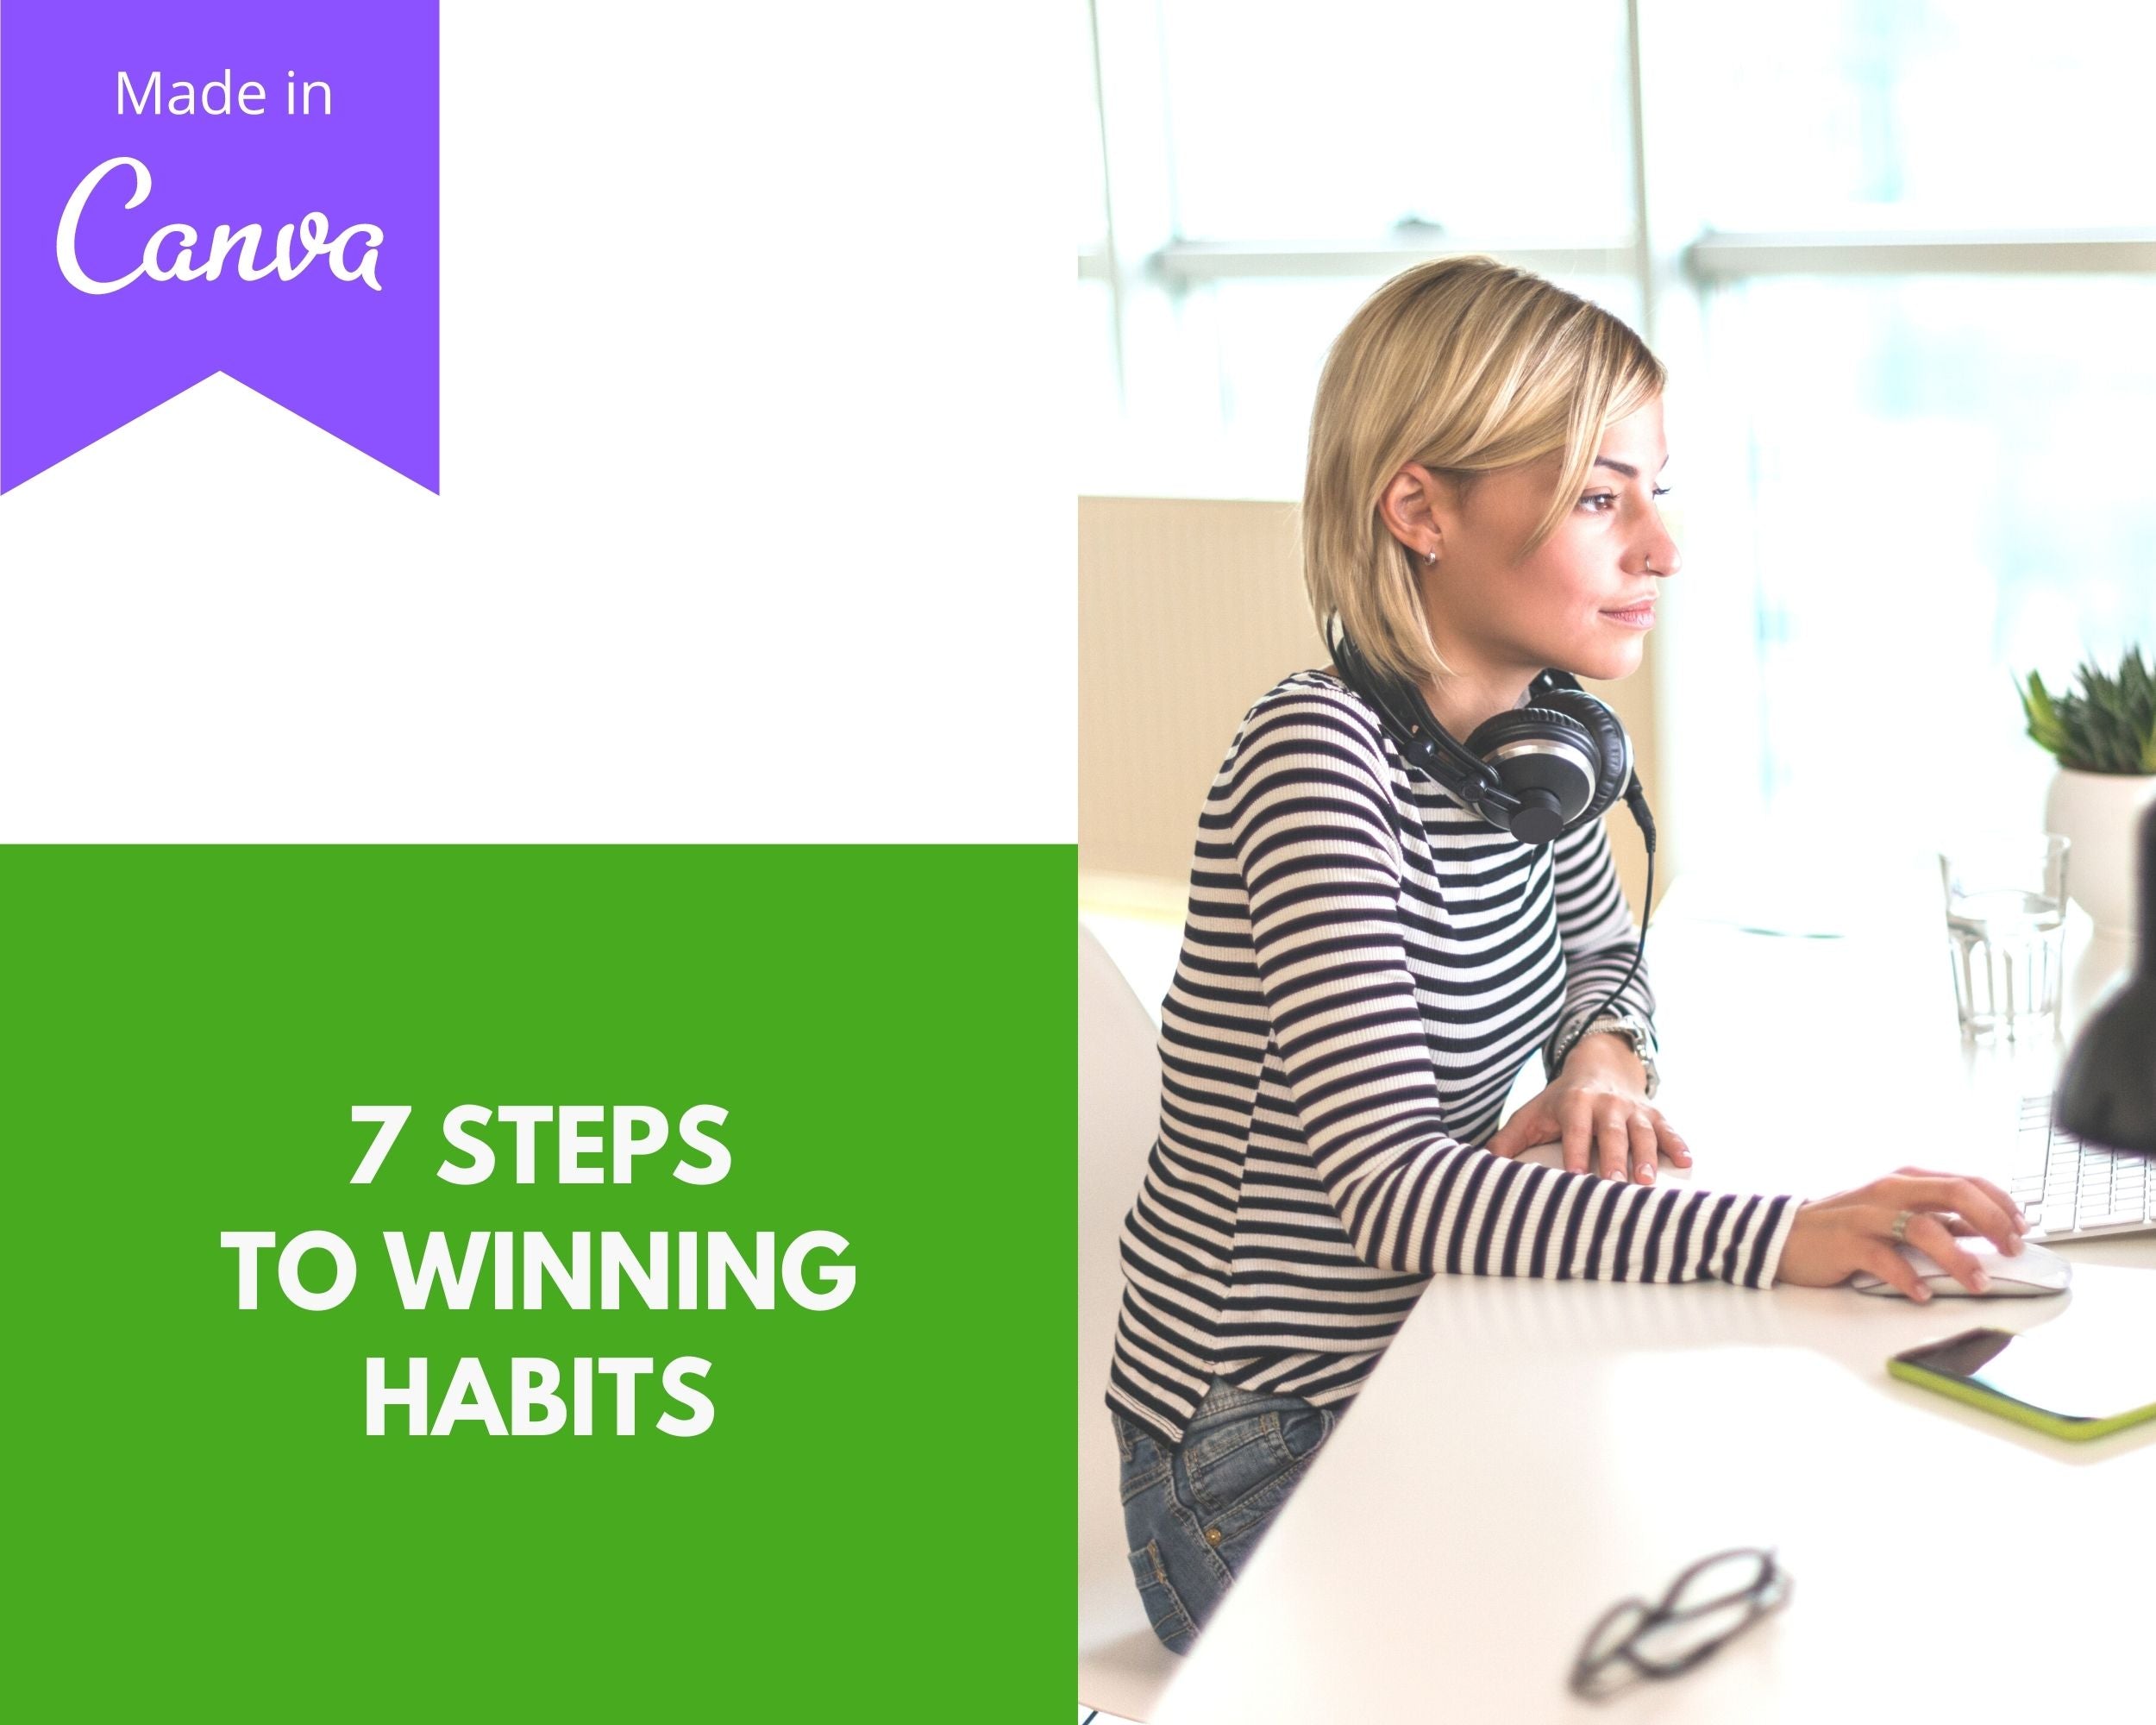 Editable Winning Habits Emails | Done-for-You eCourse | Rebrandable Newsletter